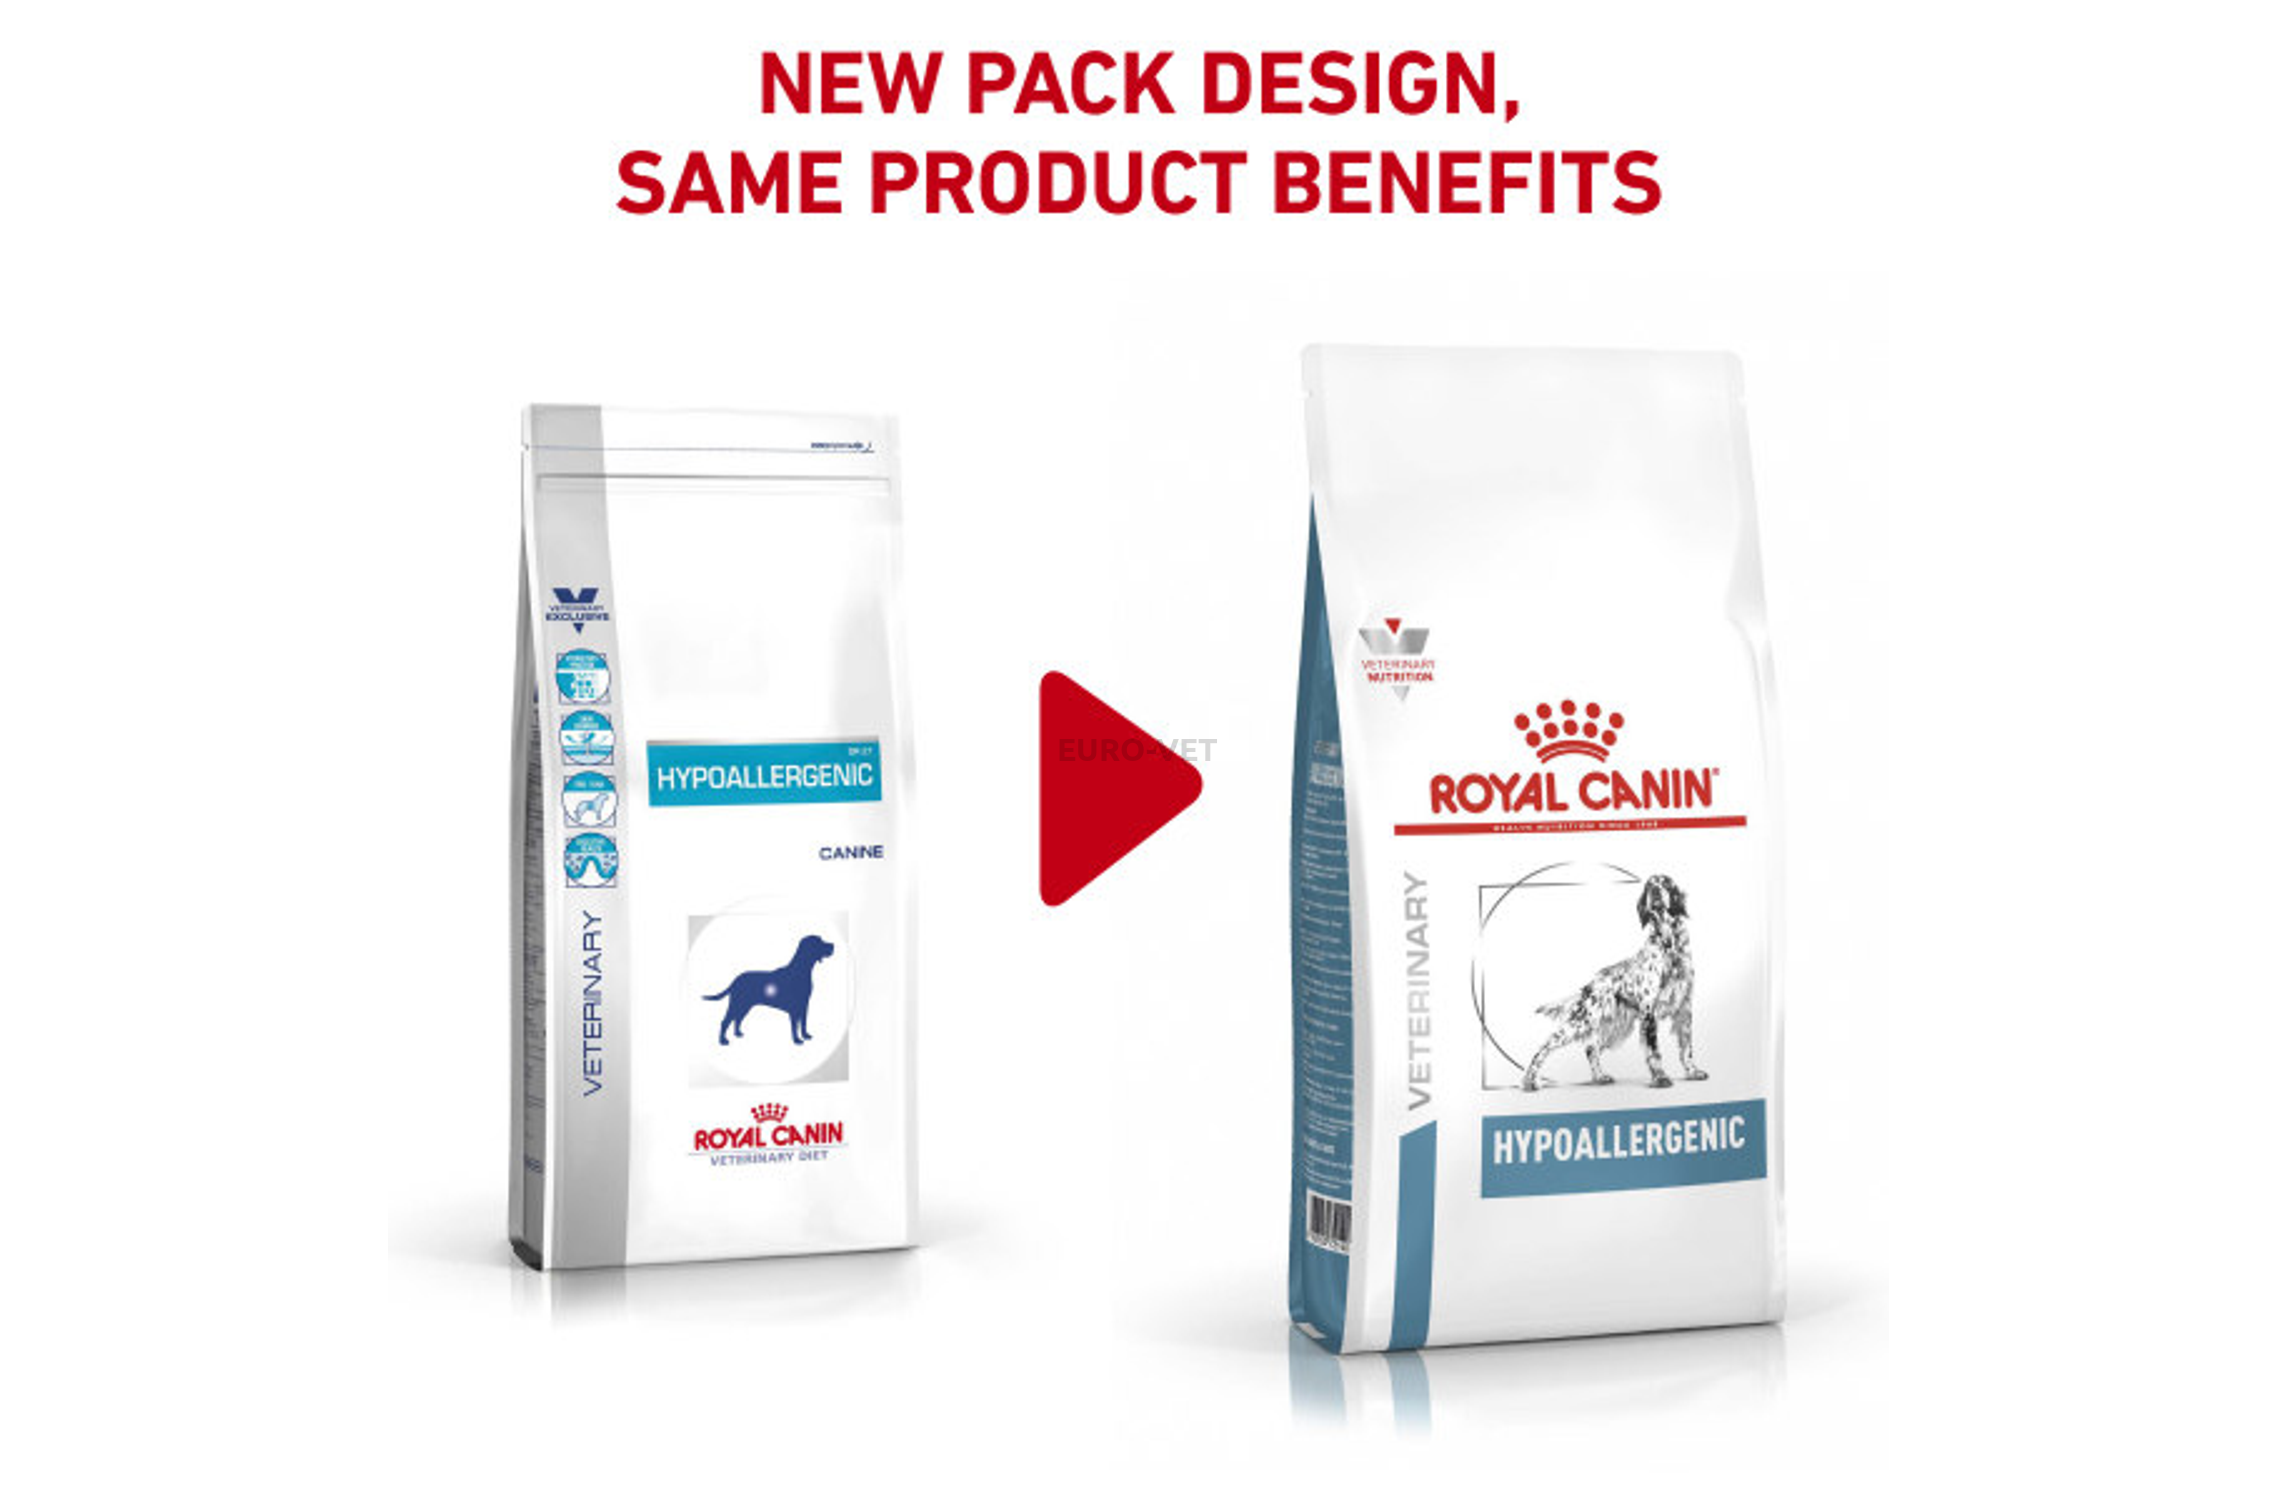 Royal Canin Hypoallergenic Dog Food Online Shopping Mall Find The Best Prices And Places To Buy